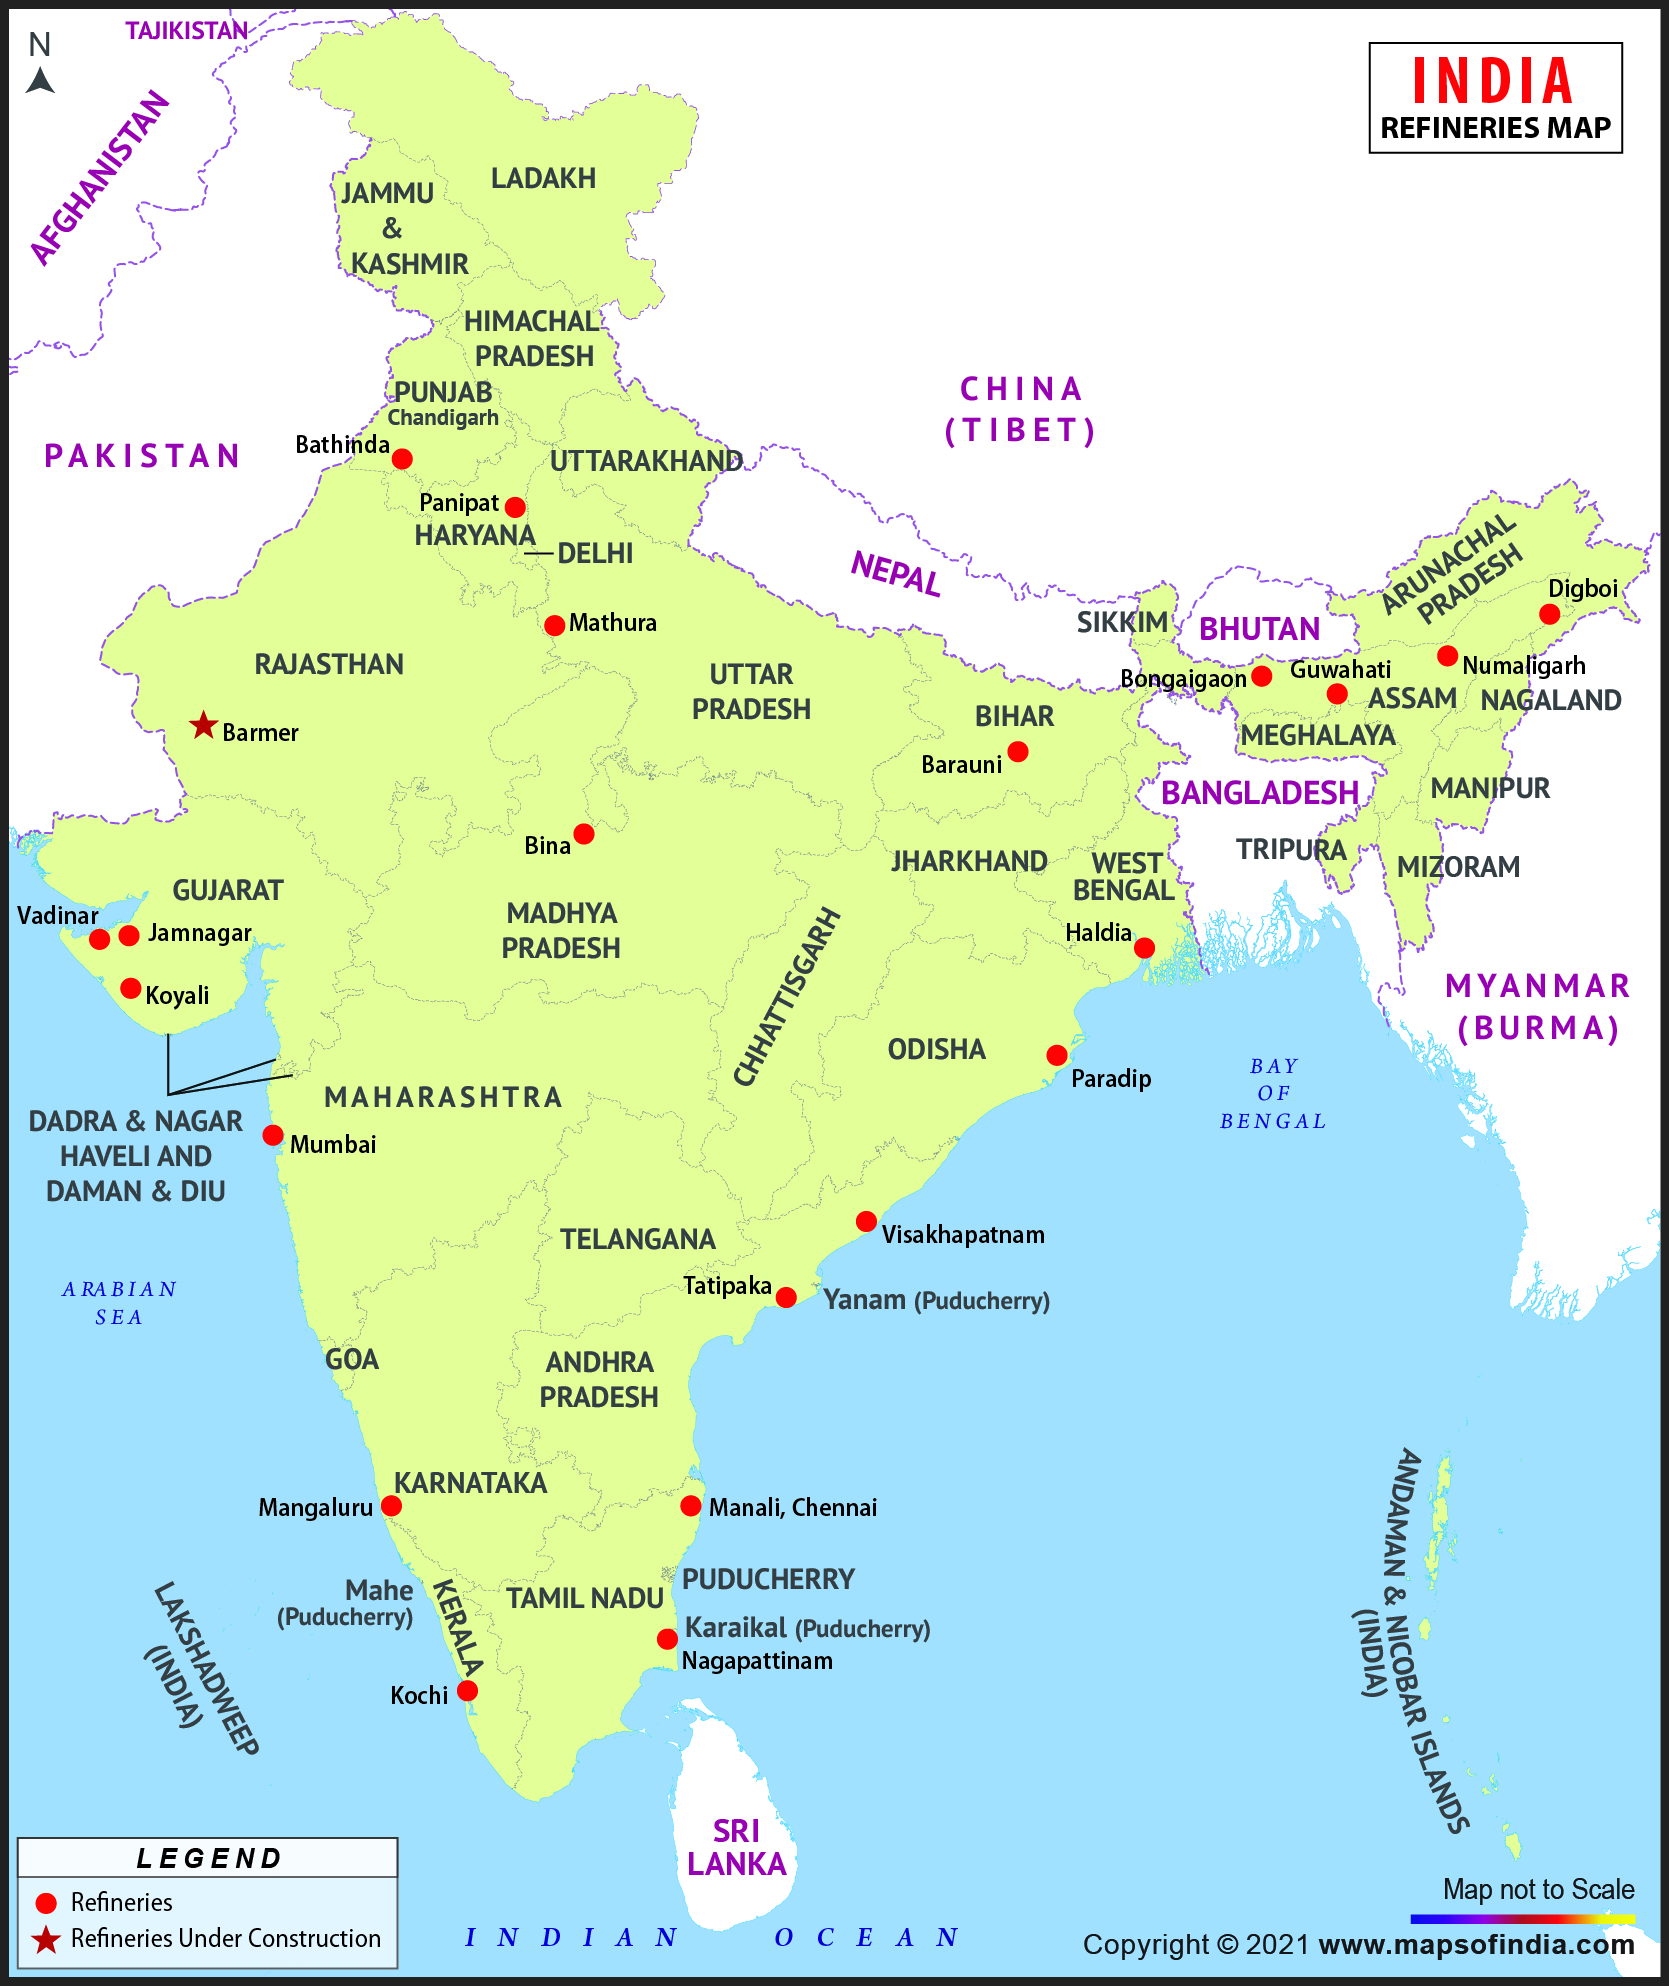 Map of Refineries in India